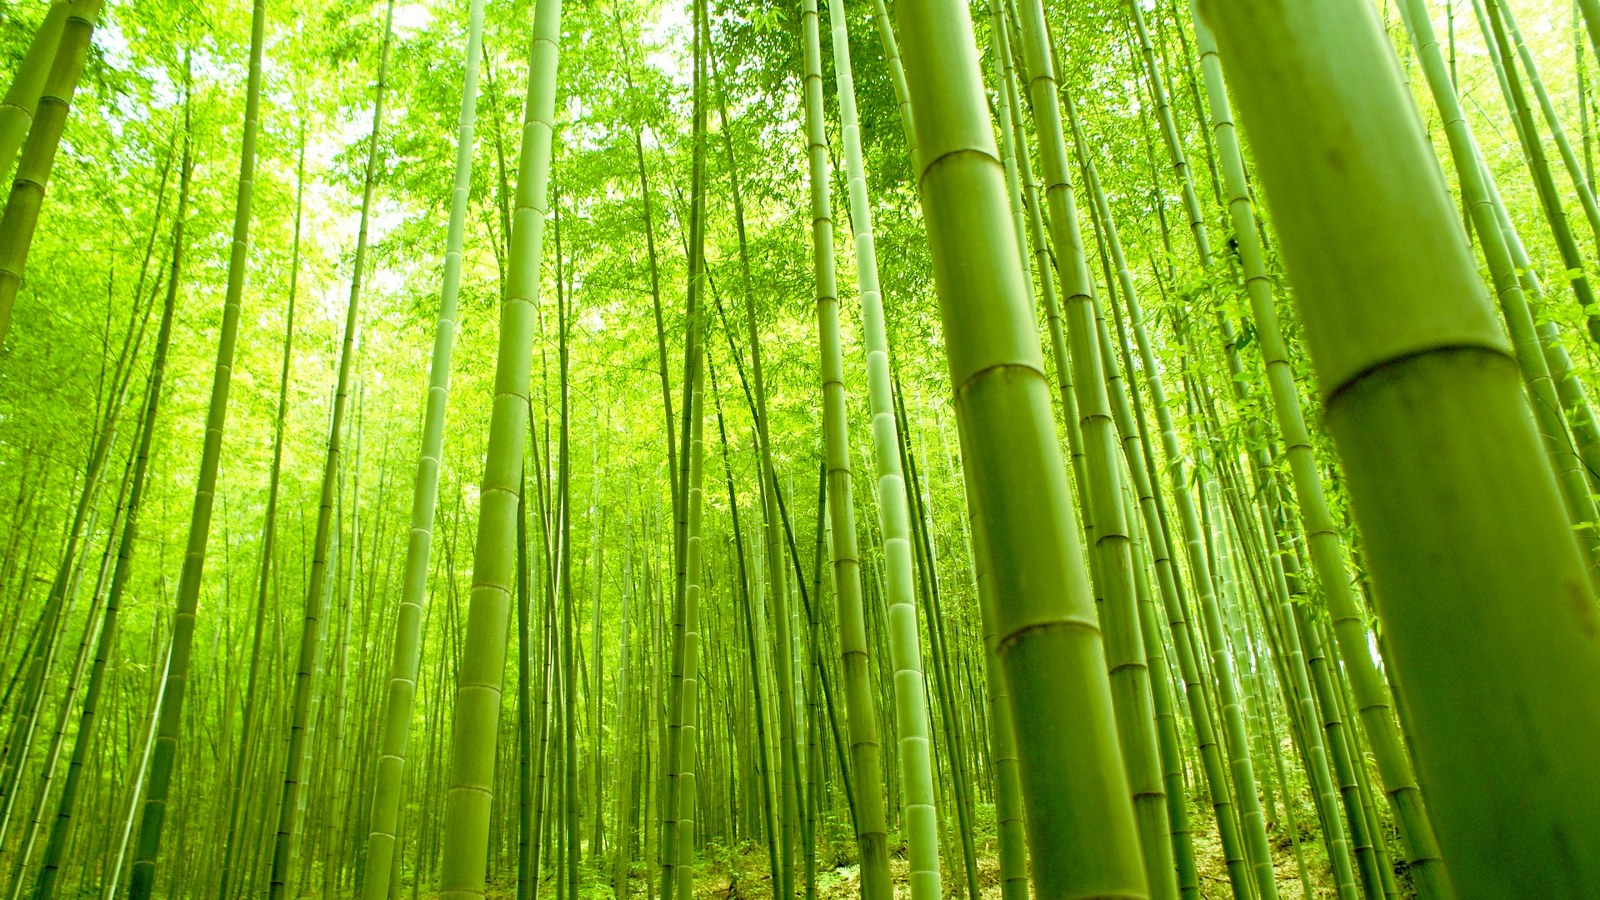 Green Bamboo In Forest Wallpaper55 Best Wallpaper For